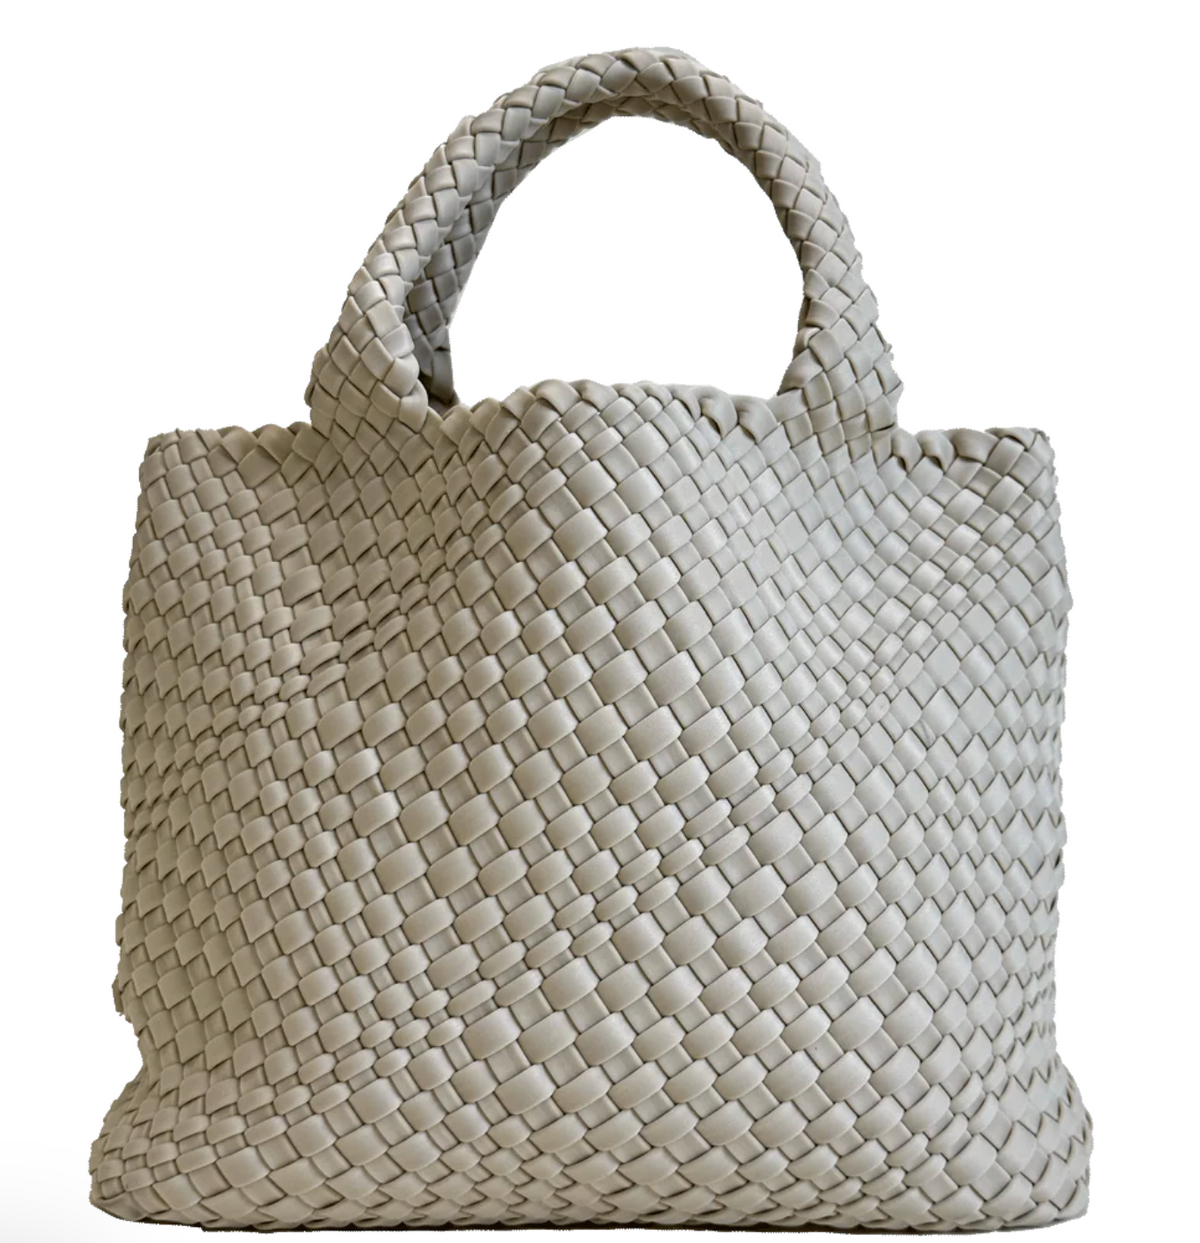 Woven Neoprene Tote with Pouch